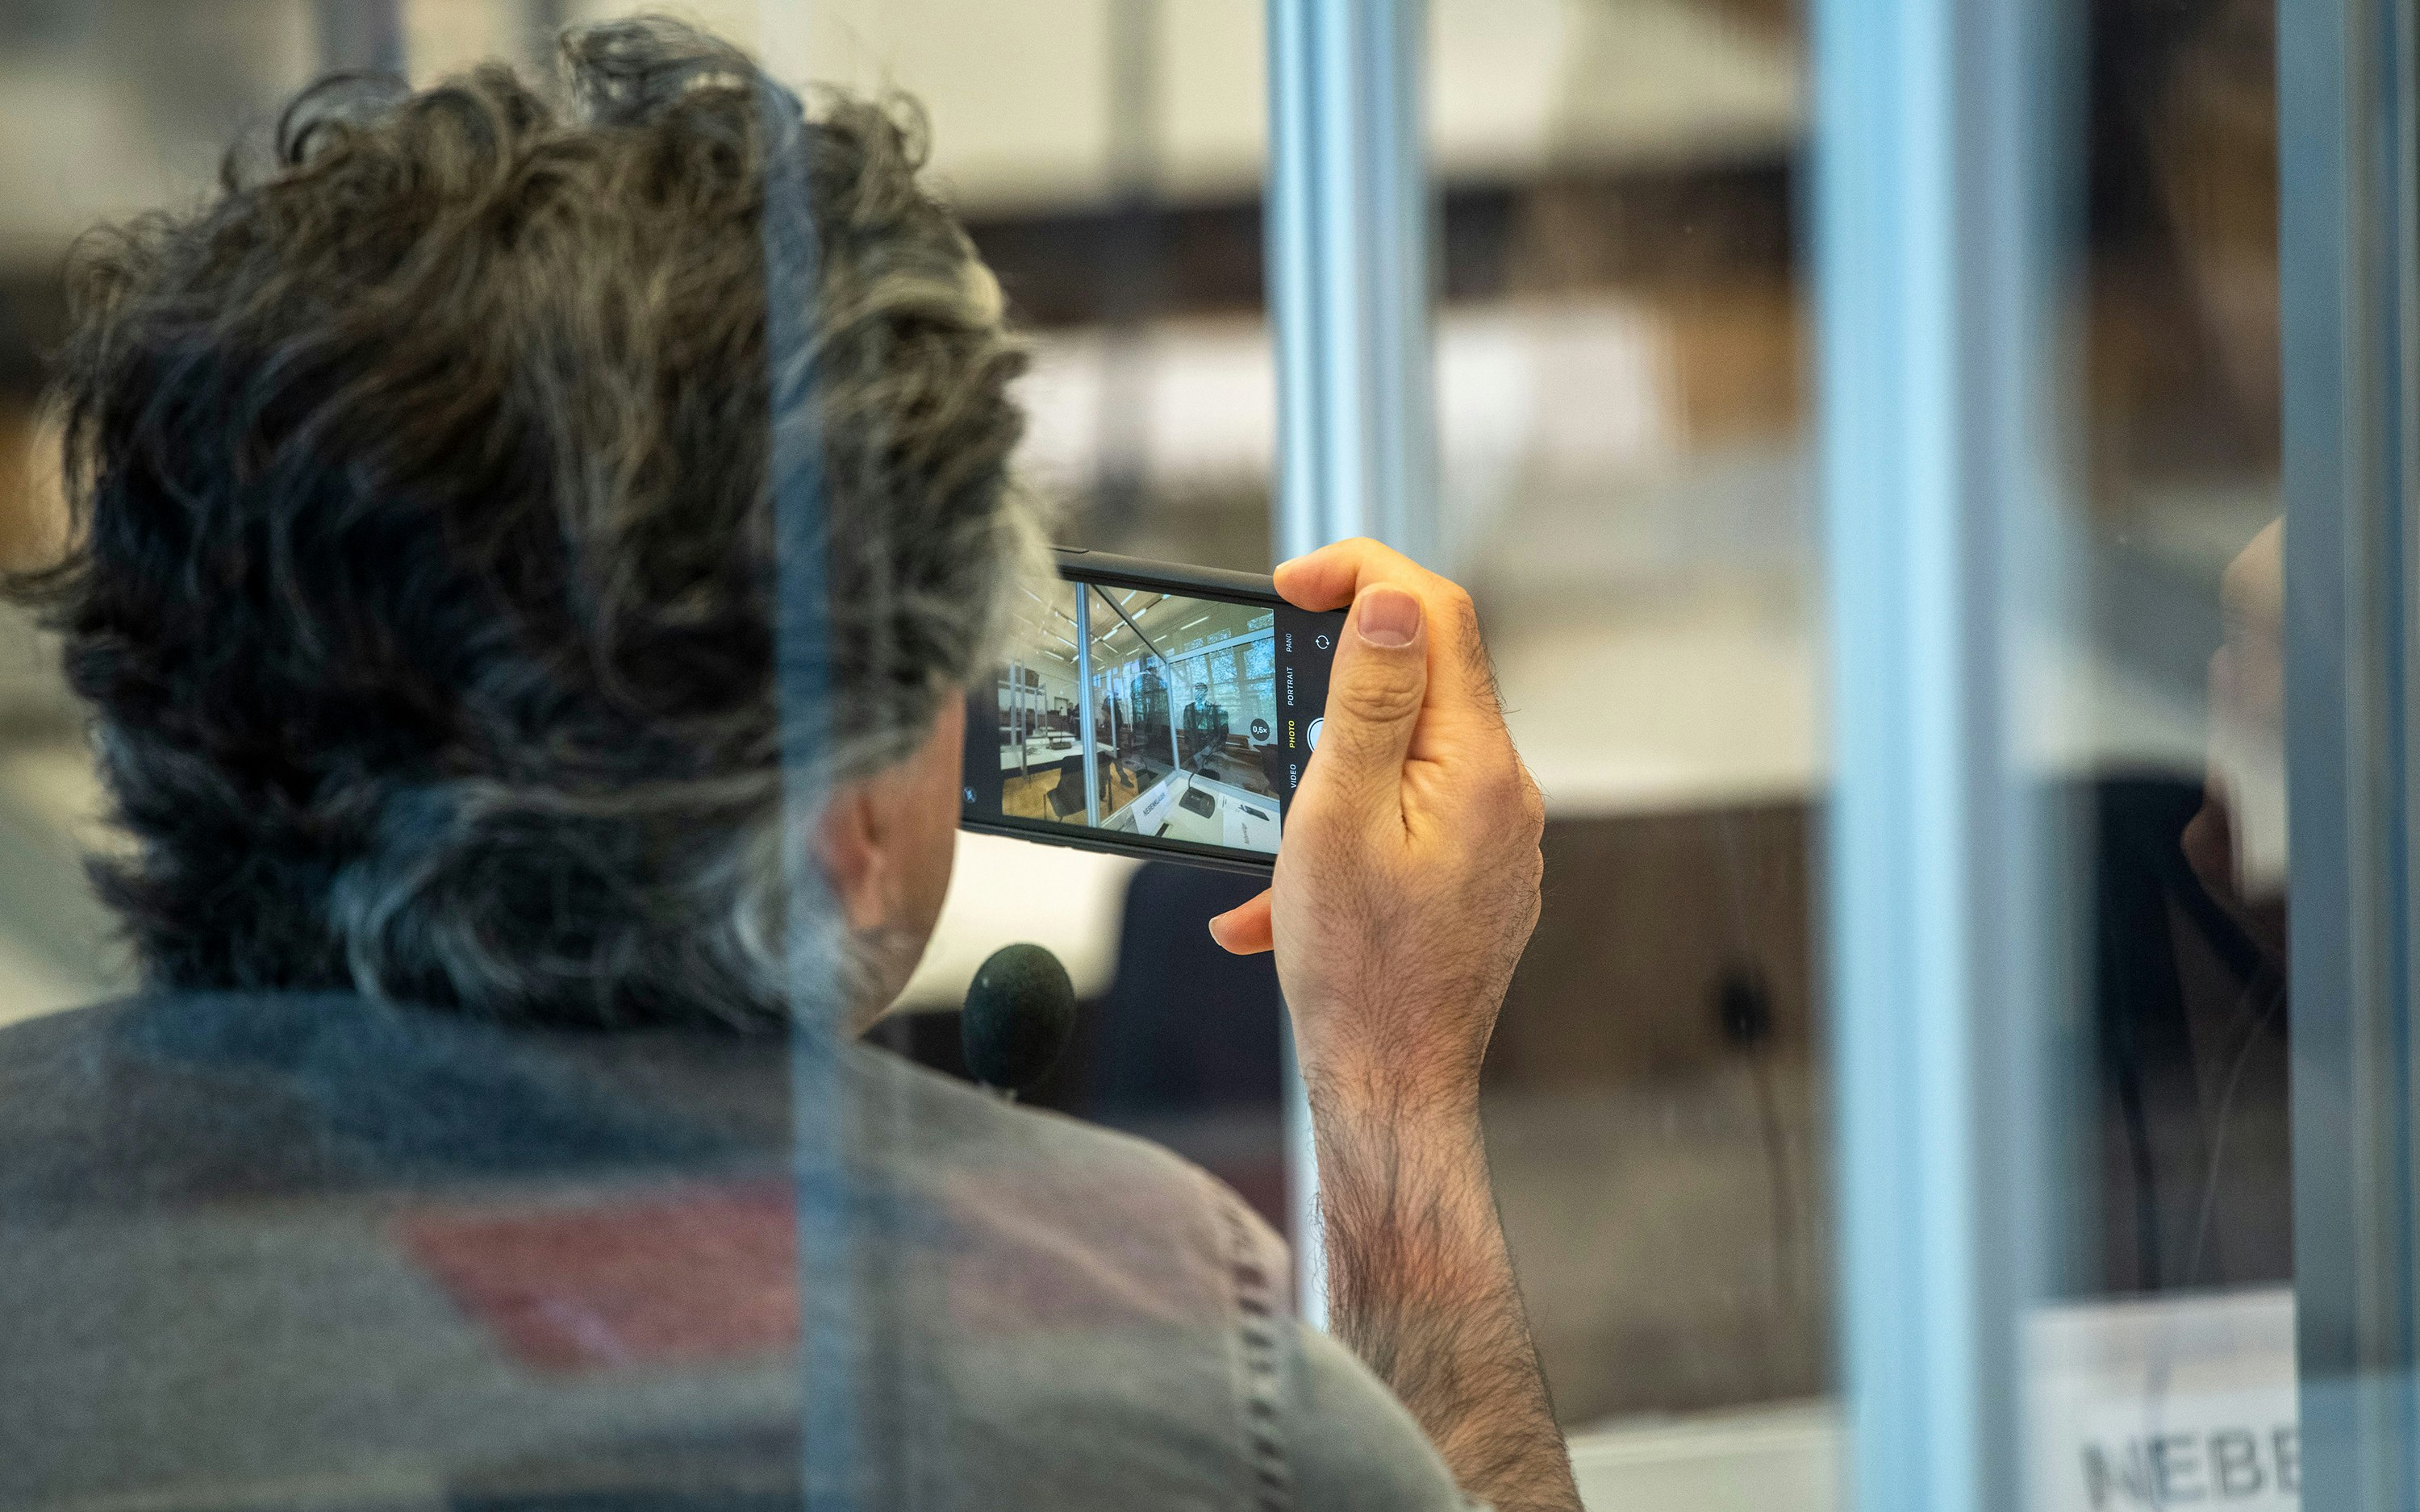 A man photographed through plexiglass panels taking a photo with a mobile phone